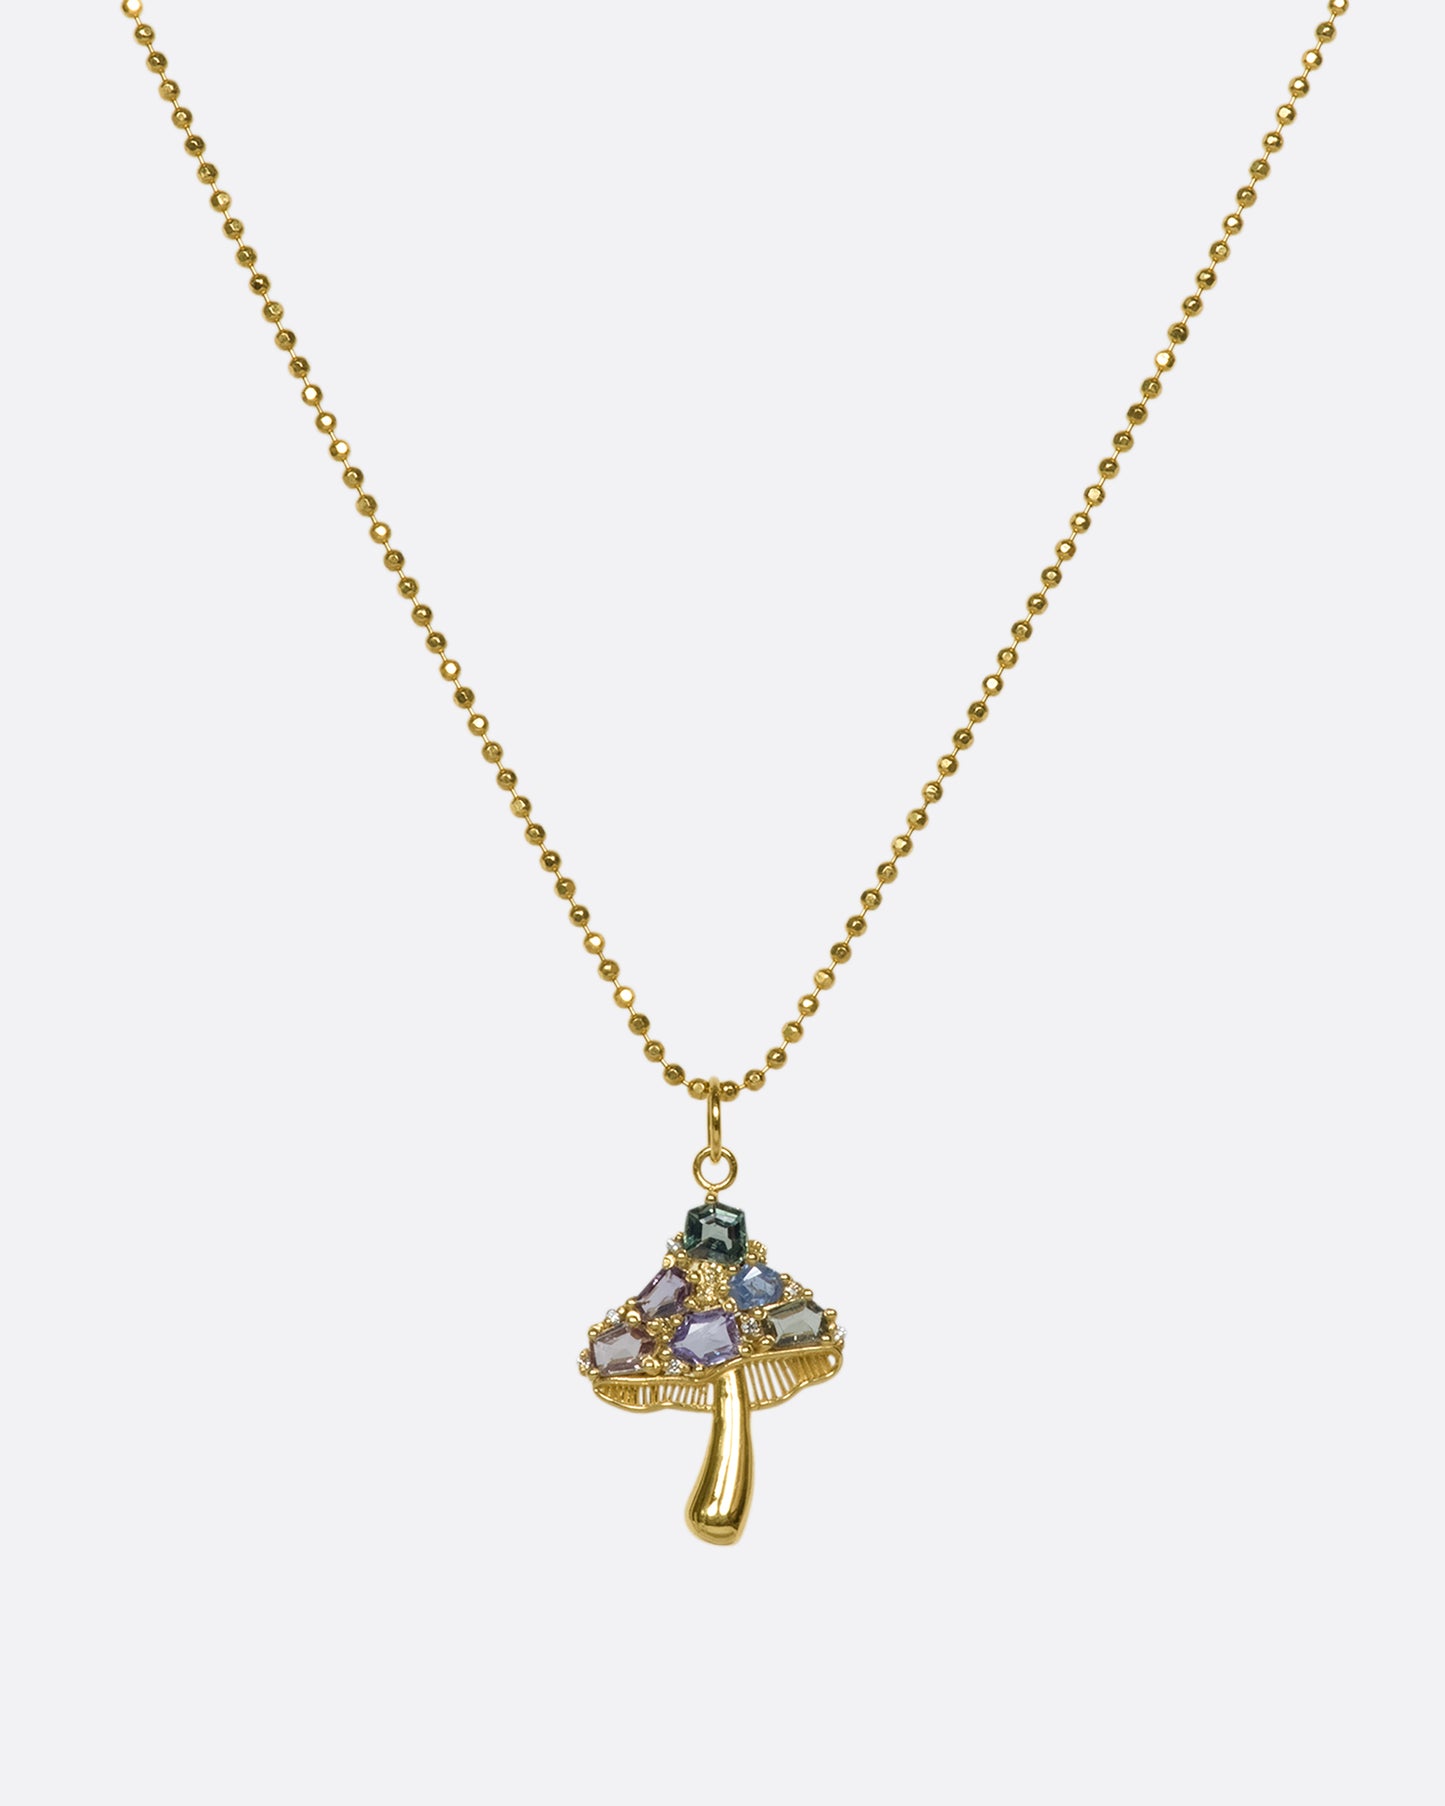 A faceted cut ball chain that refracts light, creating a sparkly look, with a 14K gold mushroom pendant